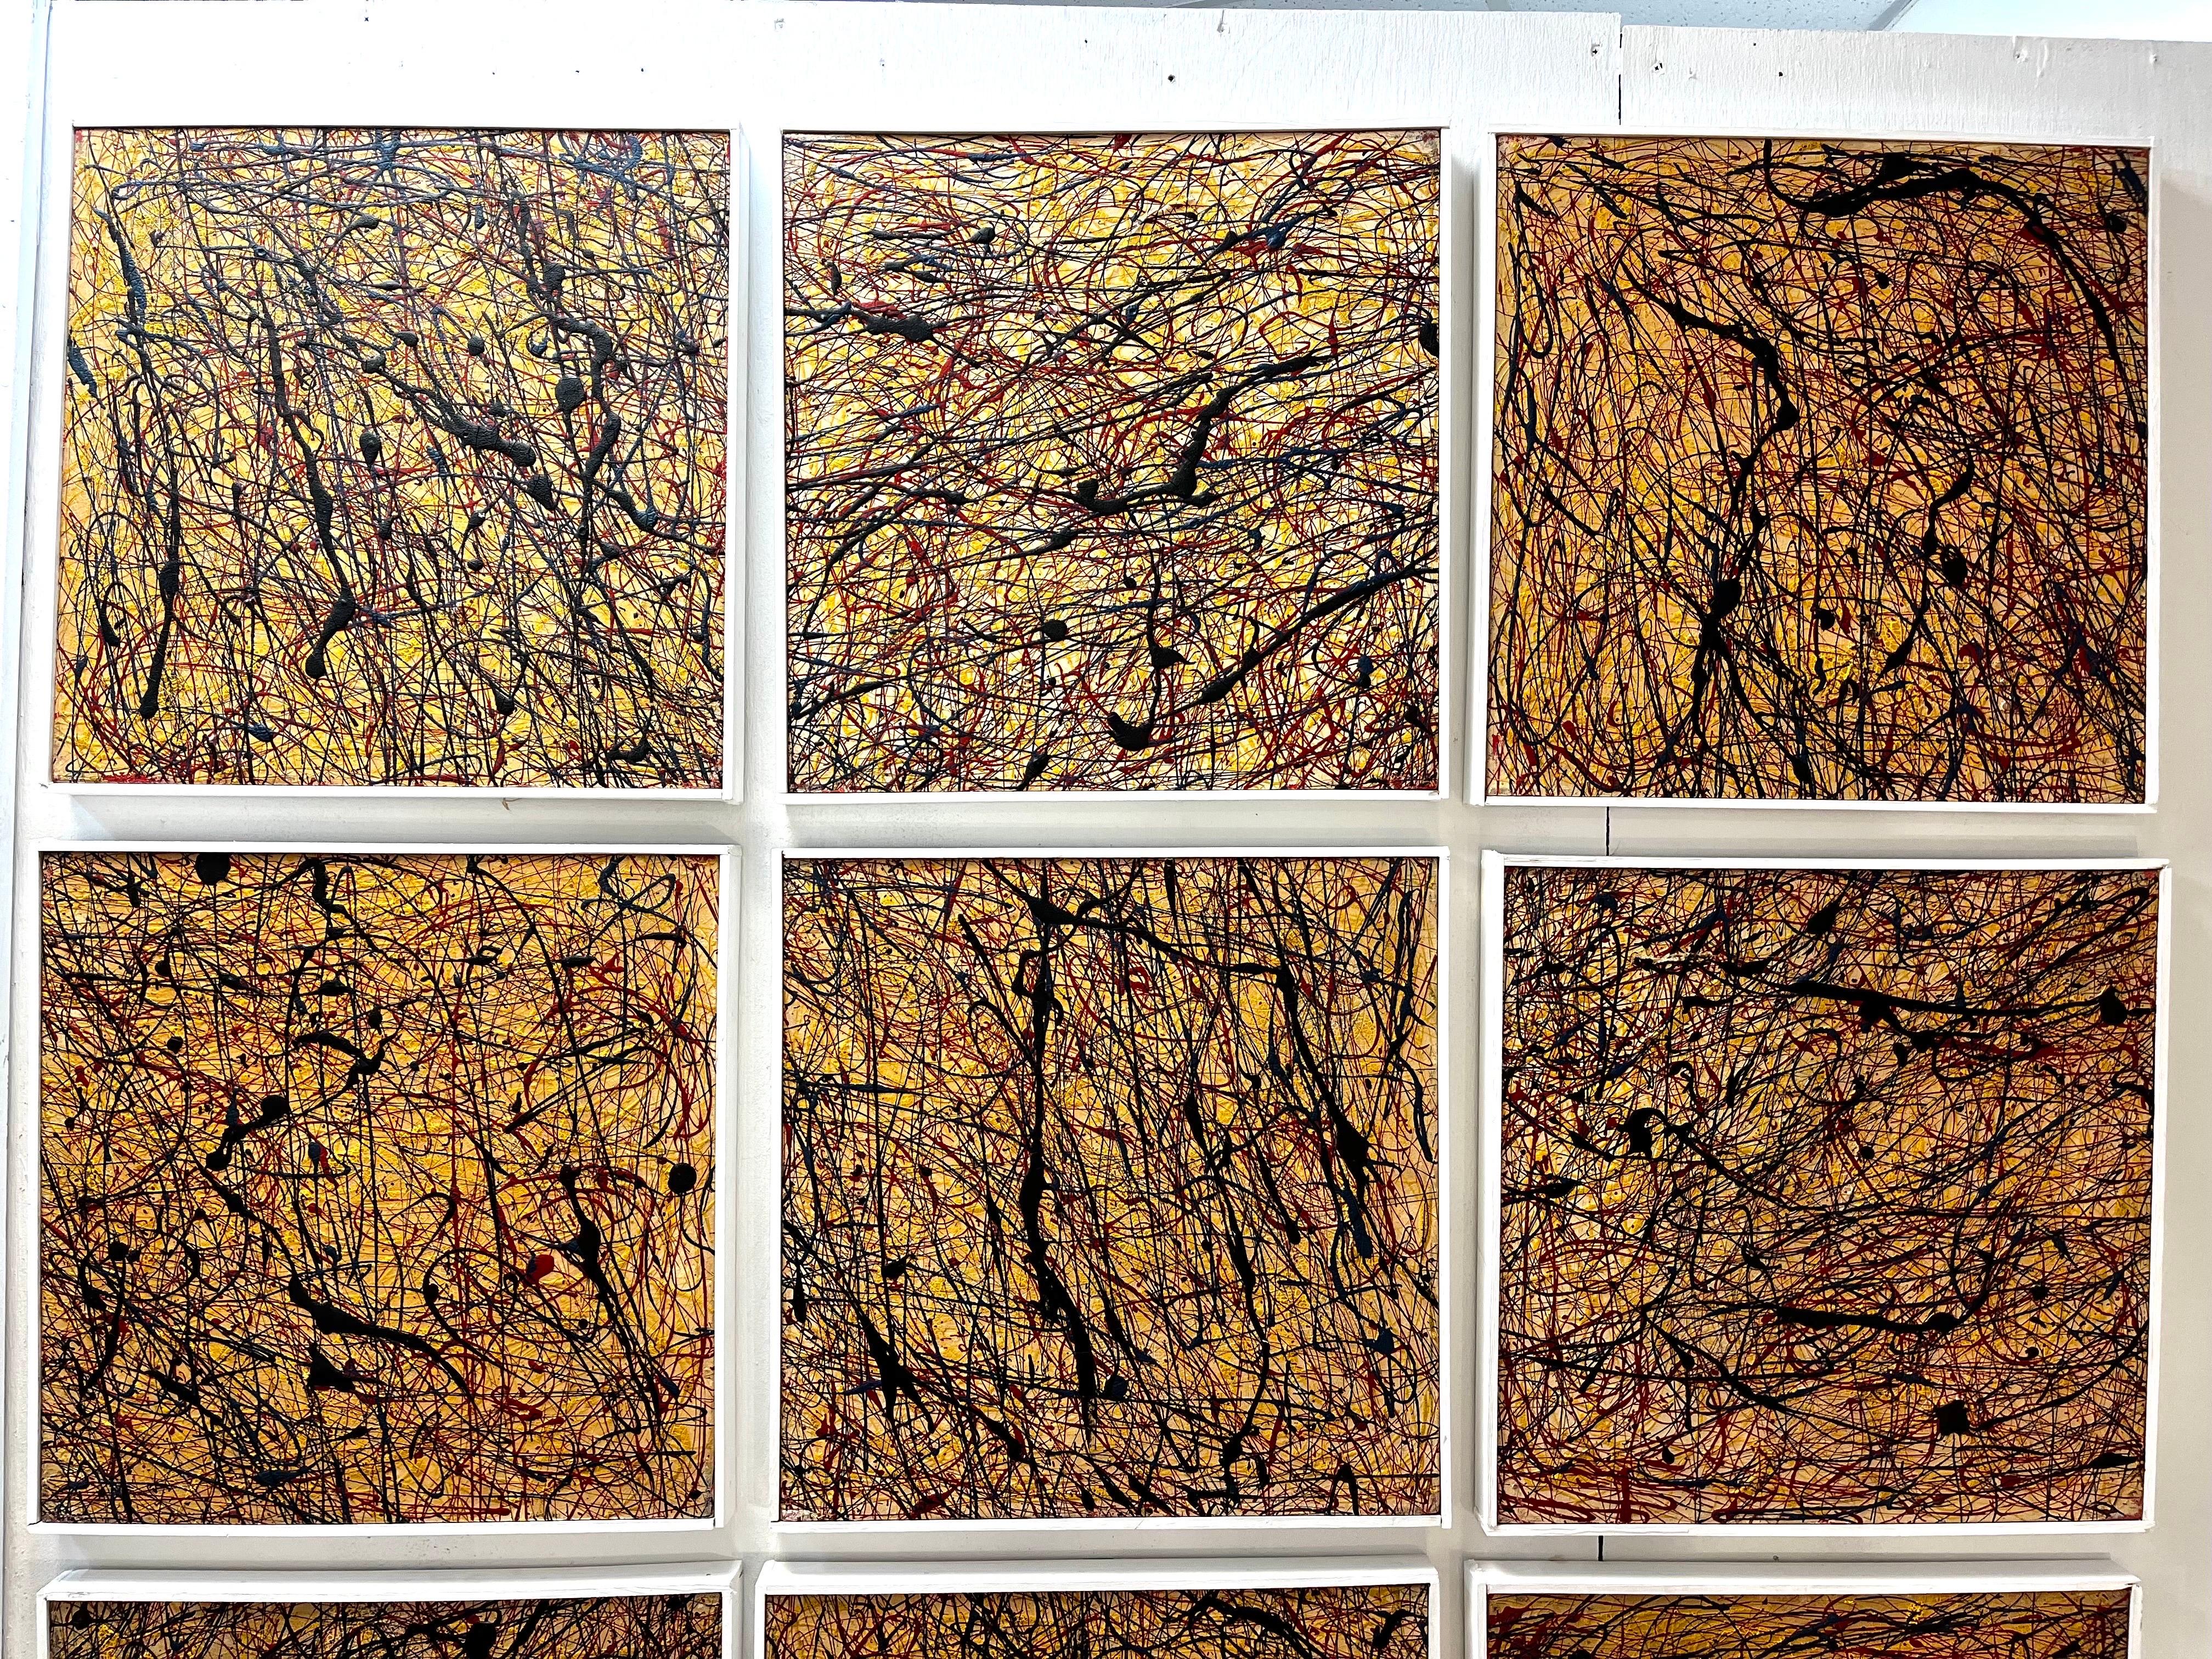 A set of twelve vintage square abstract paintings by John Peters, each of the twelve works are on canvas, framed and done in the action or drip style made famous by American artist Jackson Pollock. This style of painting is also known as gestural